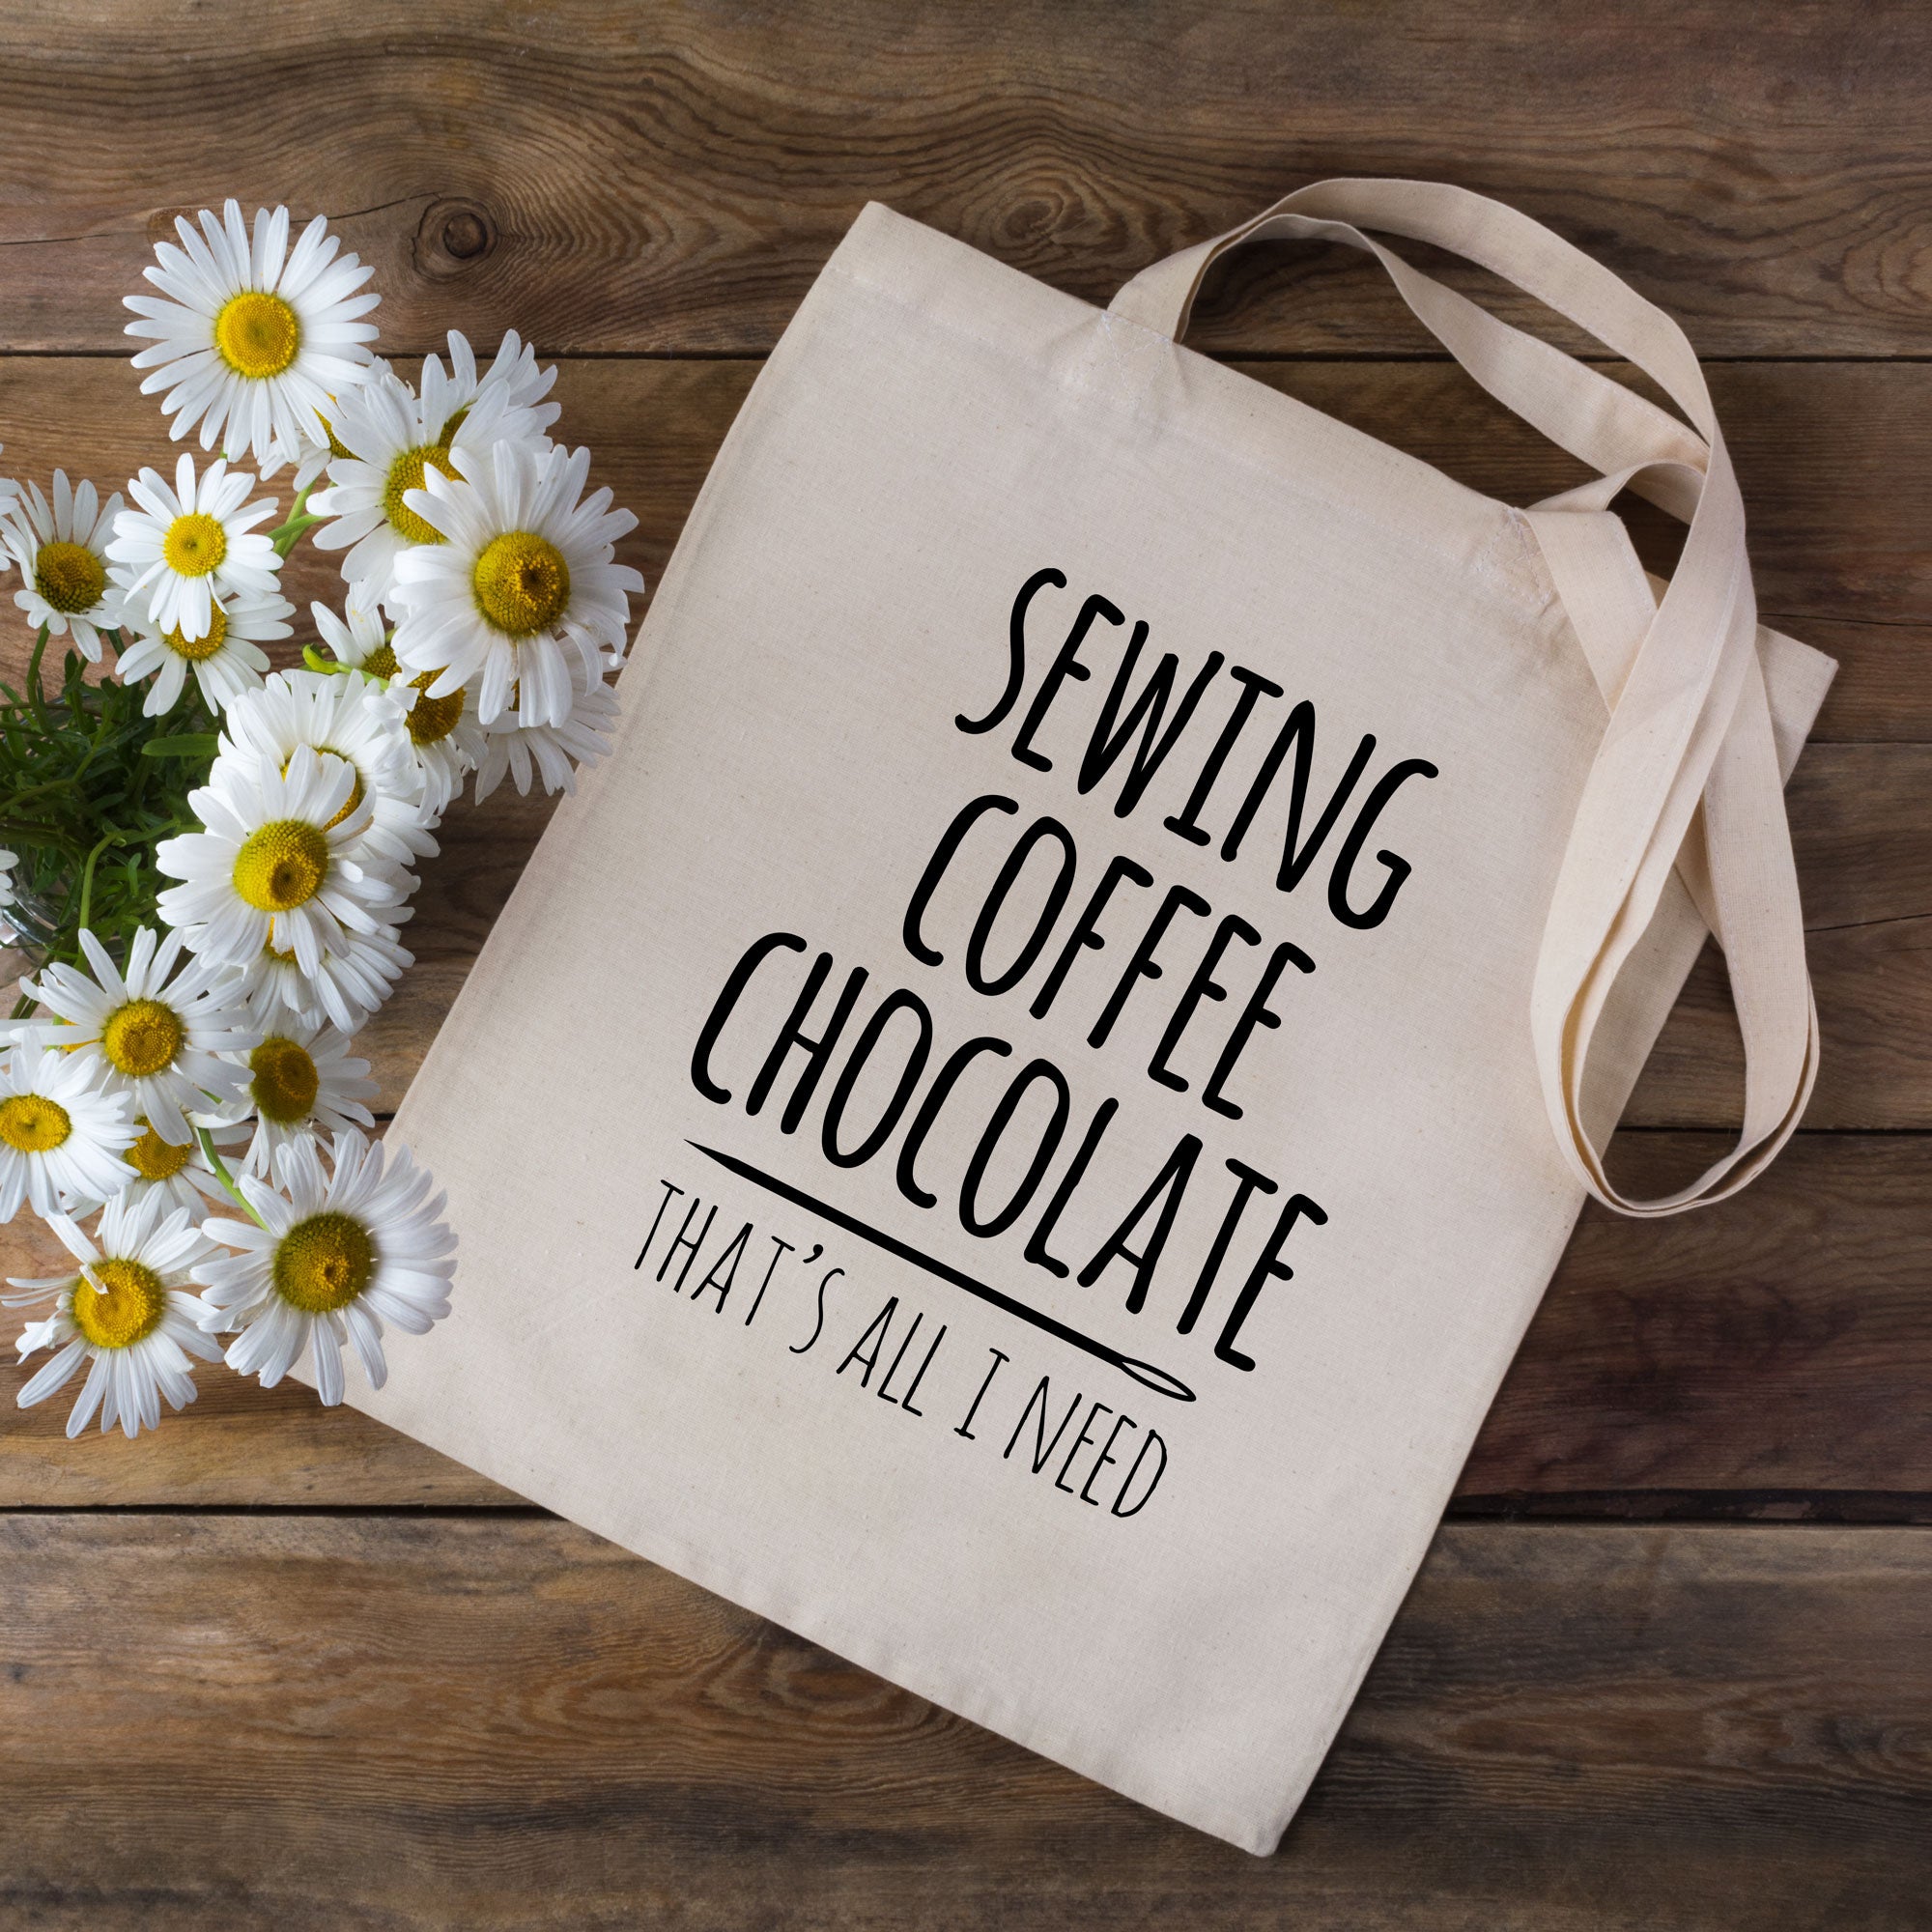 Sewing Coffee Chocolate That's All I Need Sewing Tote Bag